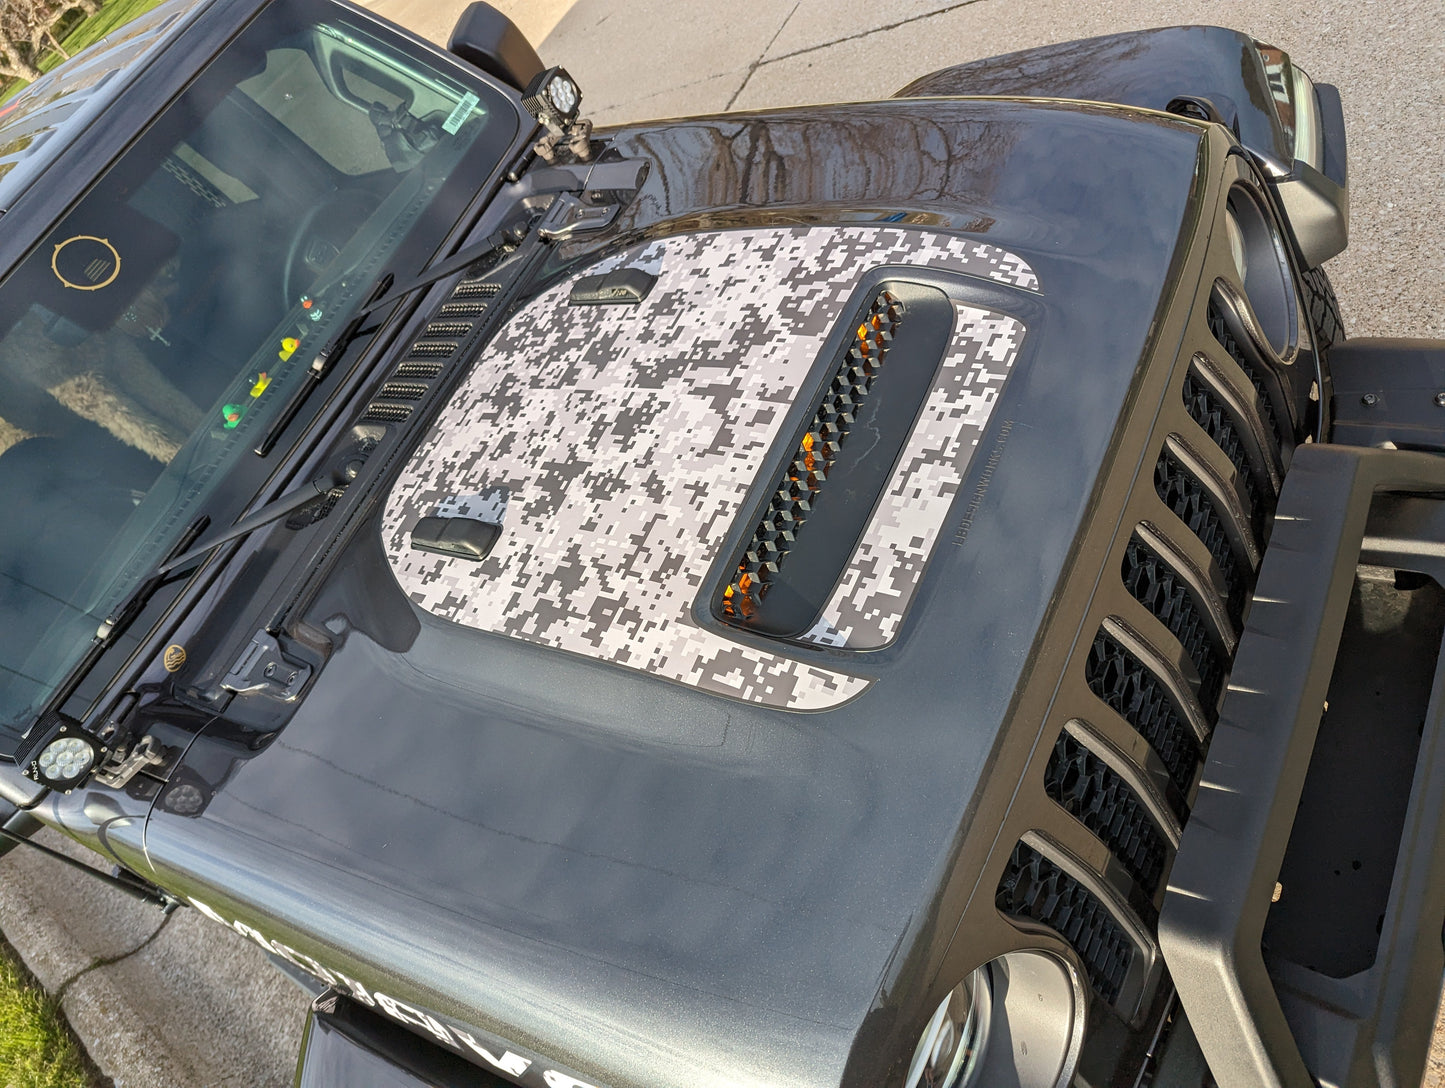 Digital Camouflage Printed Blackout Vent Rubicon Mojave decal set- fits 2020 and newer Jeep Gladiator